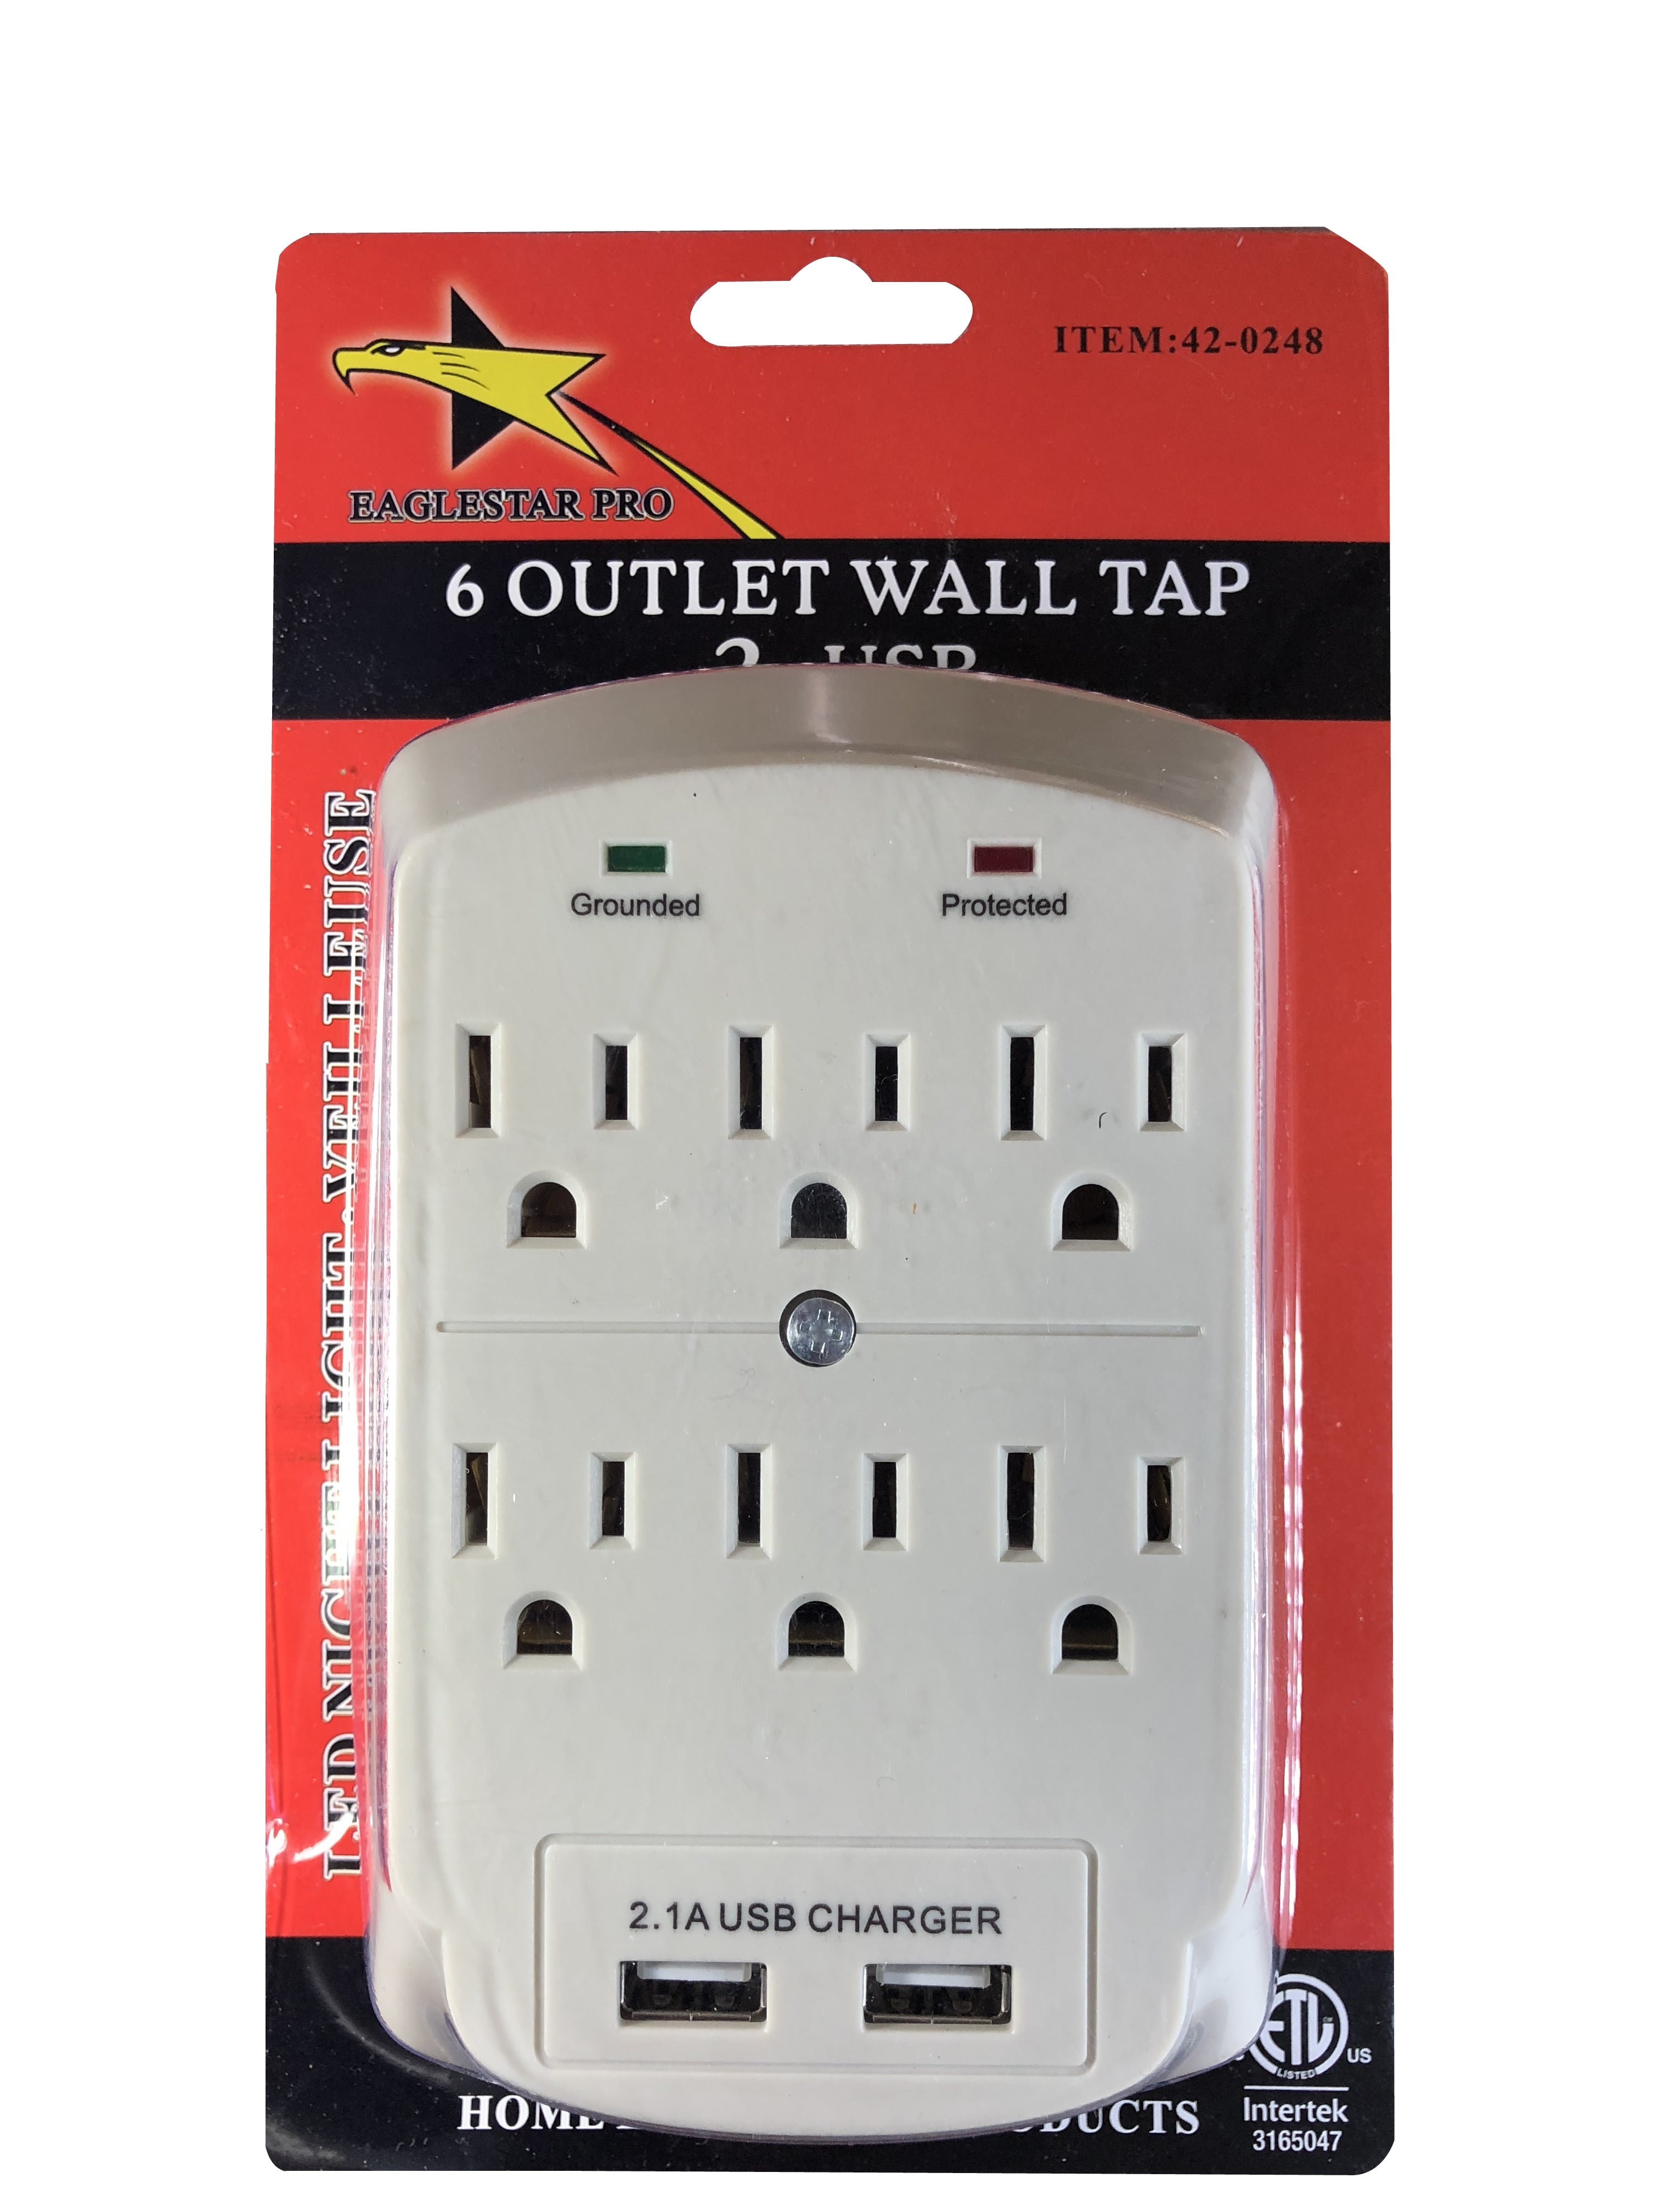 42-0248 6 Outlet Grounded Wall Tap Adapter, with 2 USB Charging Ports, ETL Certified